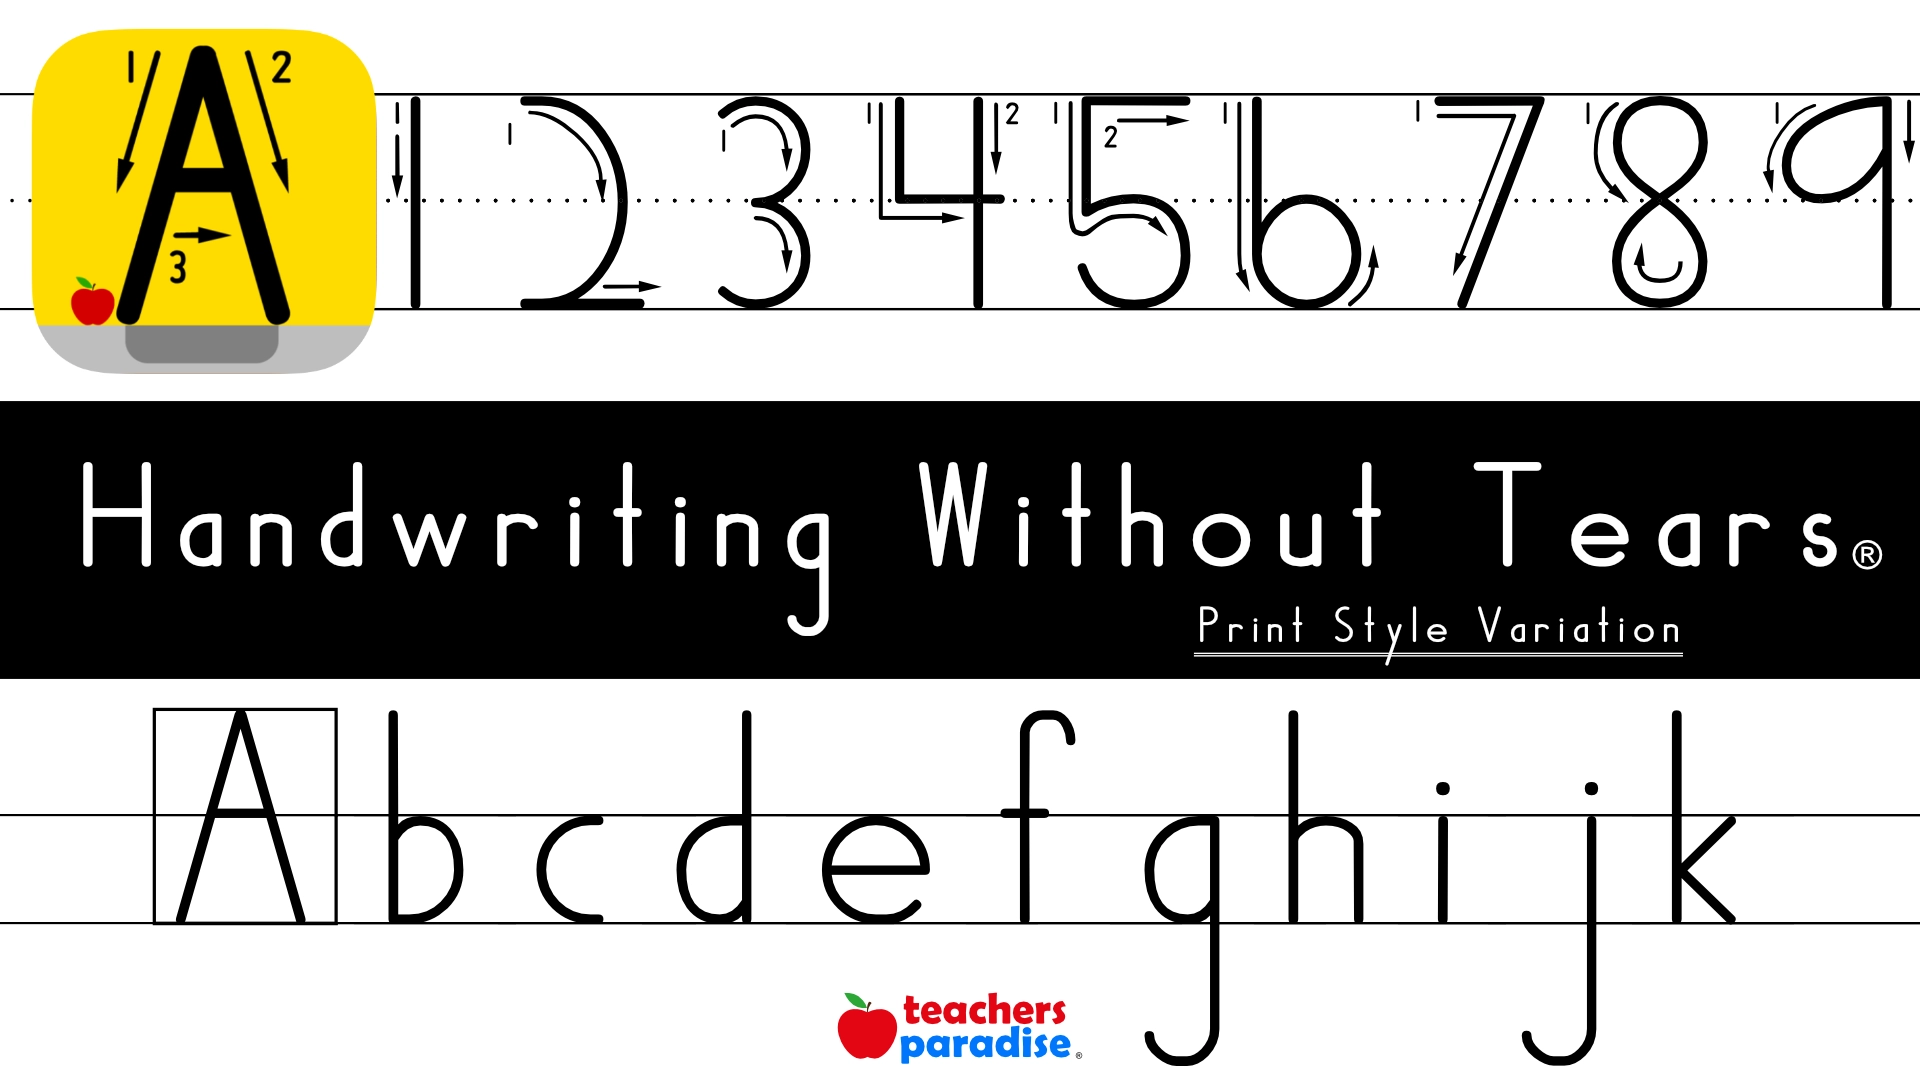 123s ABCs Handwriting Without Tears® Print Style